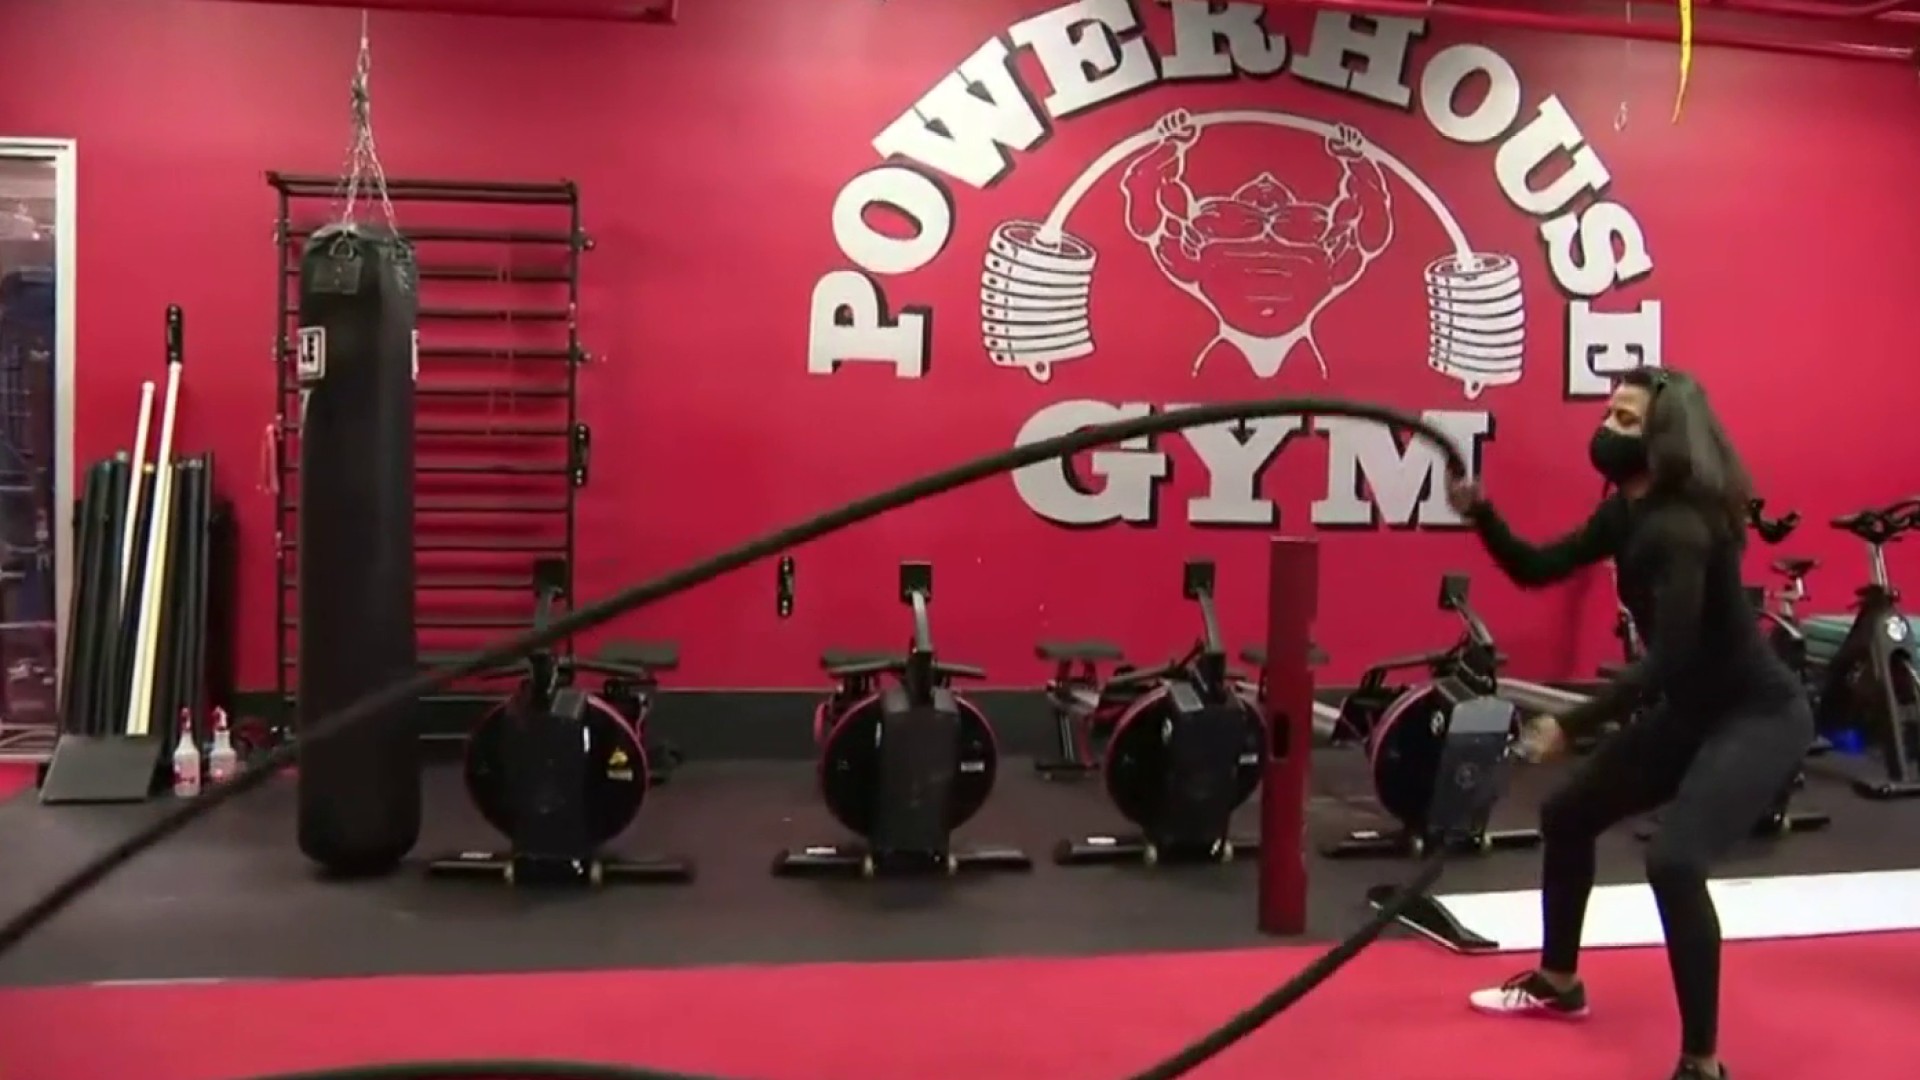 Fitness Friday: High intensity interval training at Powerhouse Gym